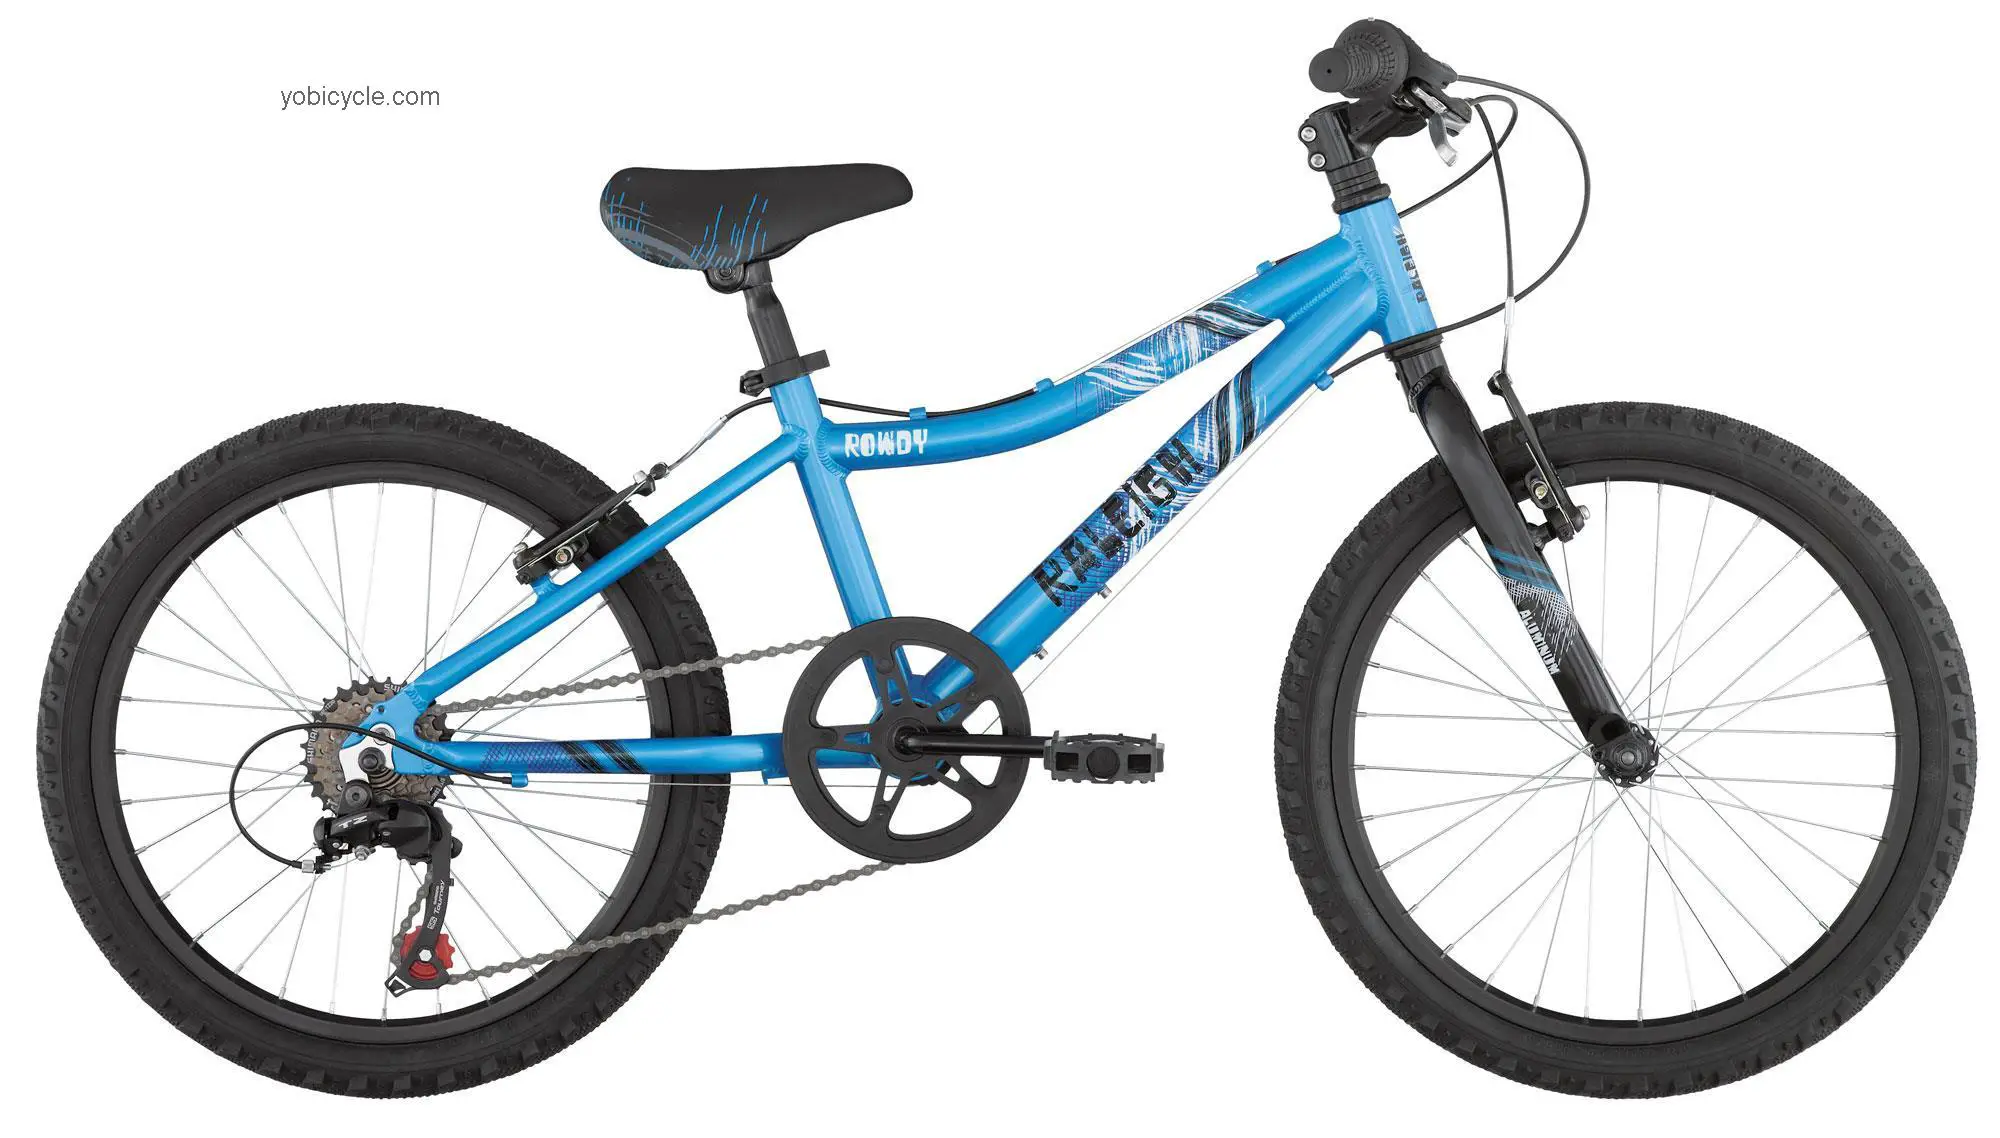 Raleigh Rowdy 2012 comparison online with competitors